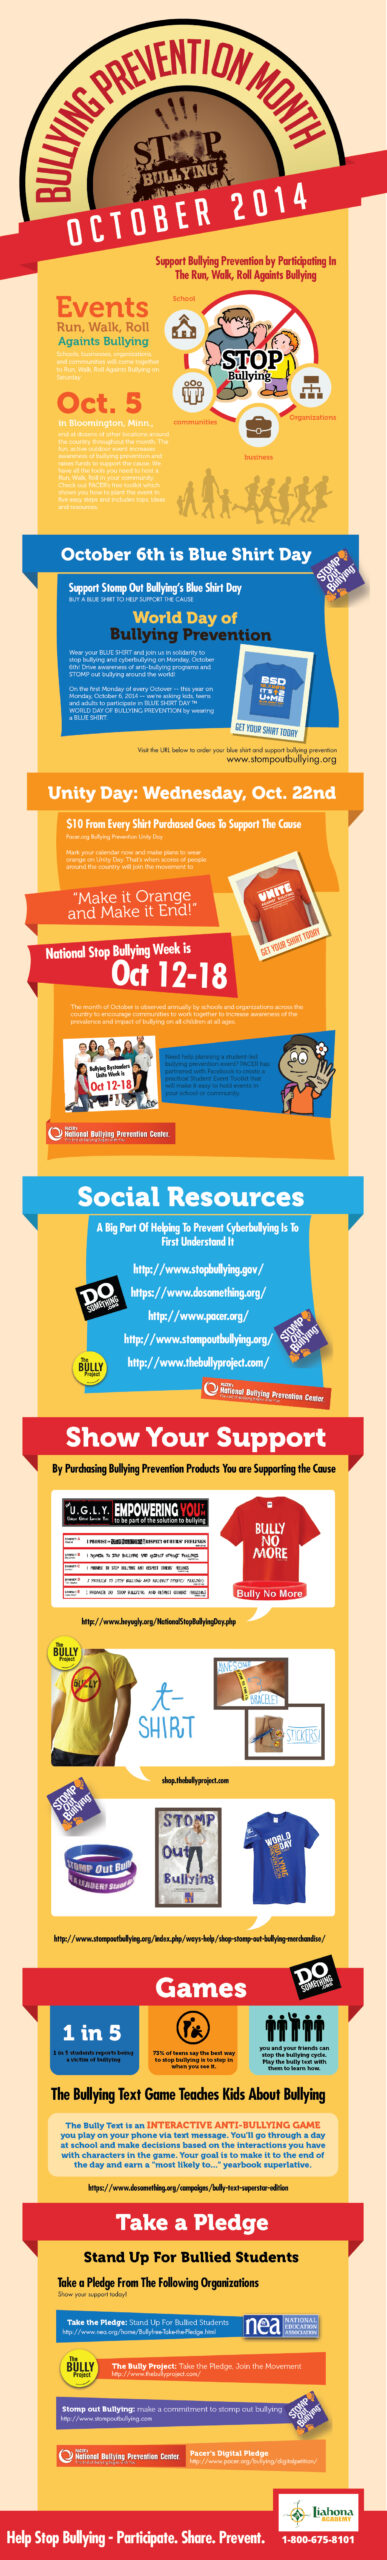 Educational infographic : poster for the Anti Bullying Campaign by Amber Harloff ...